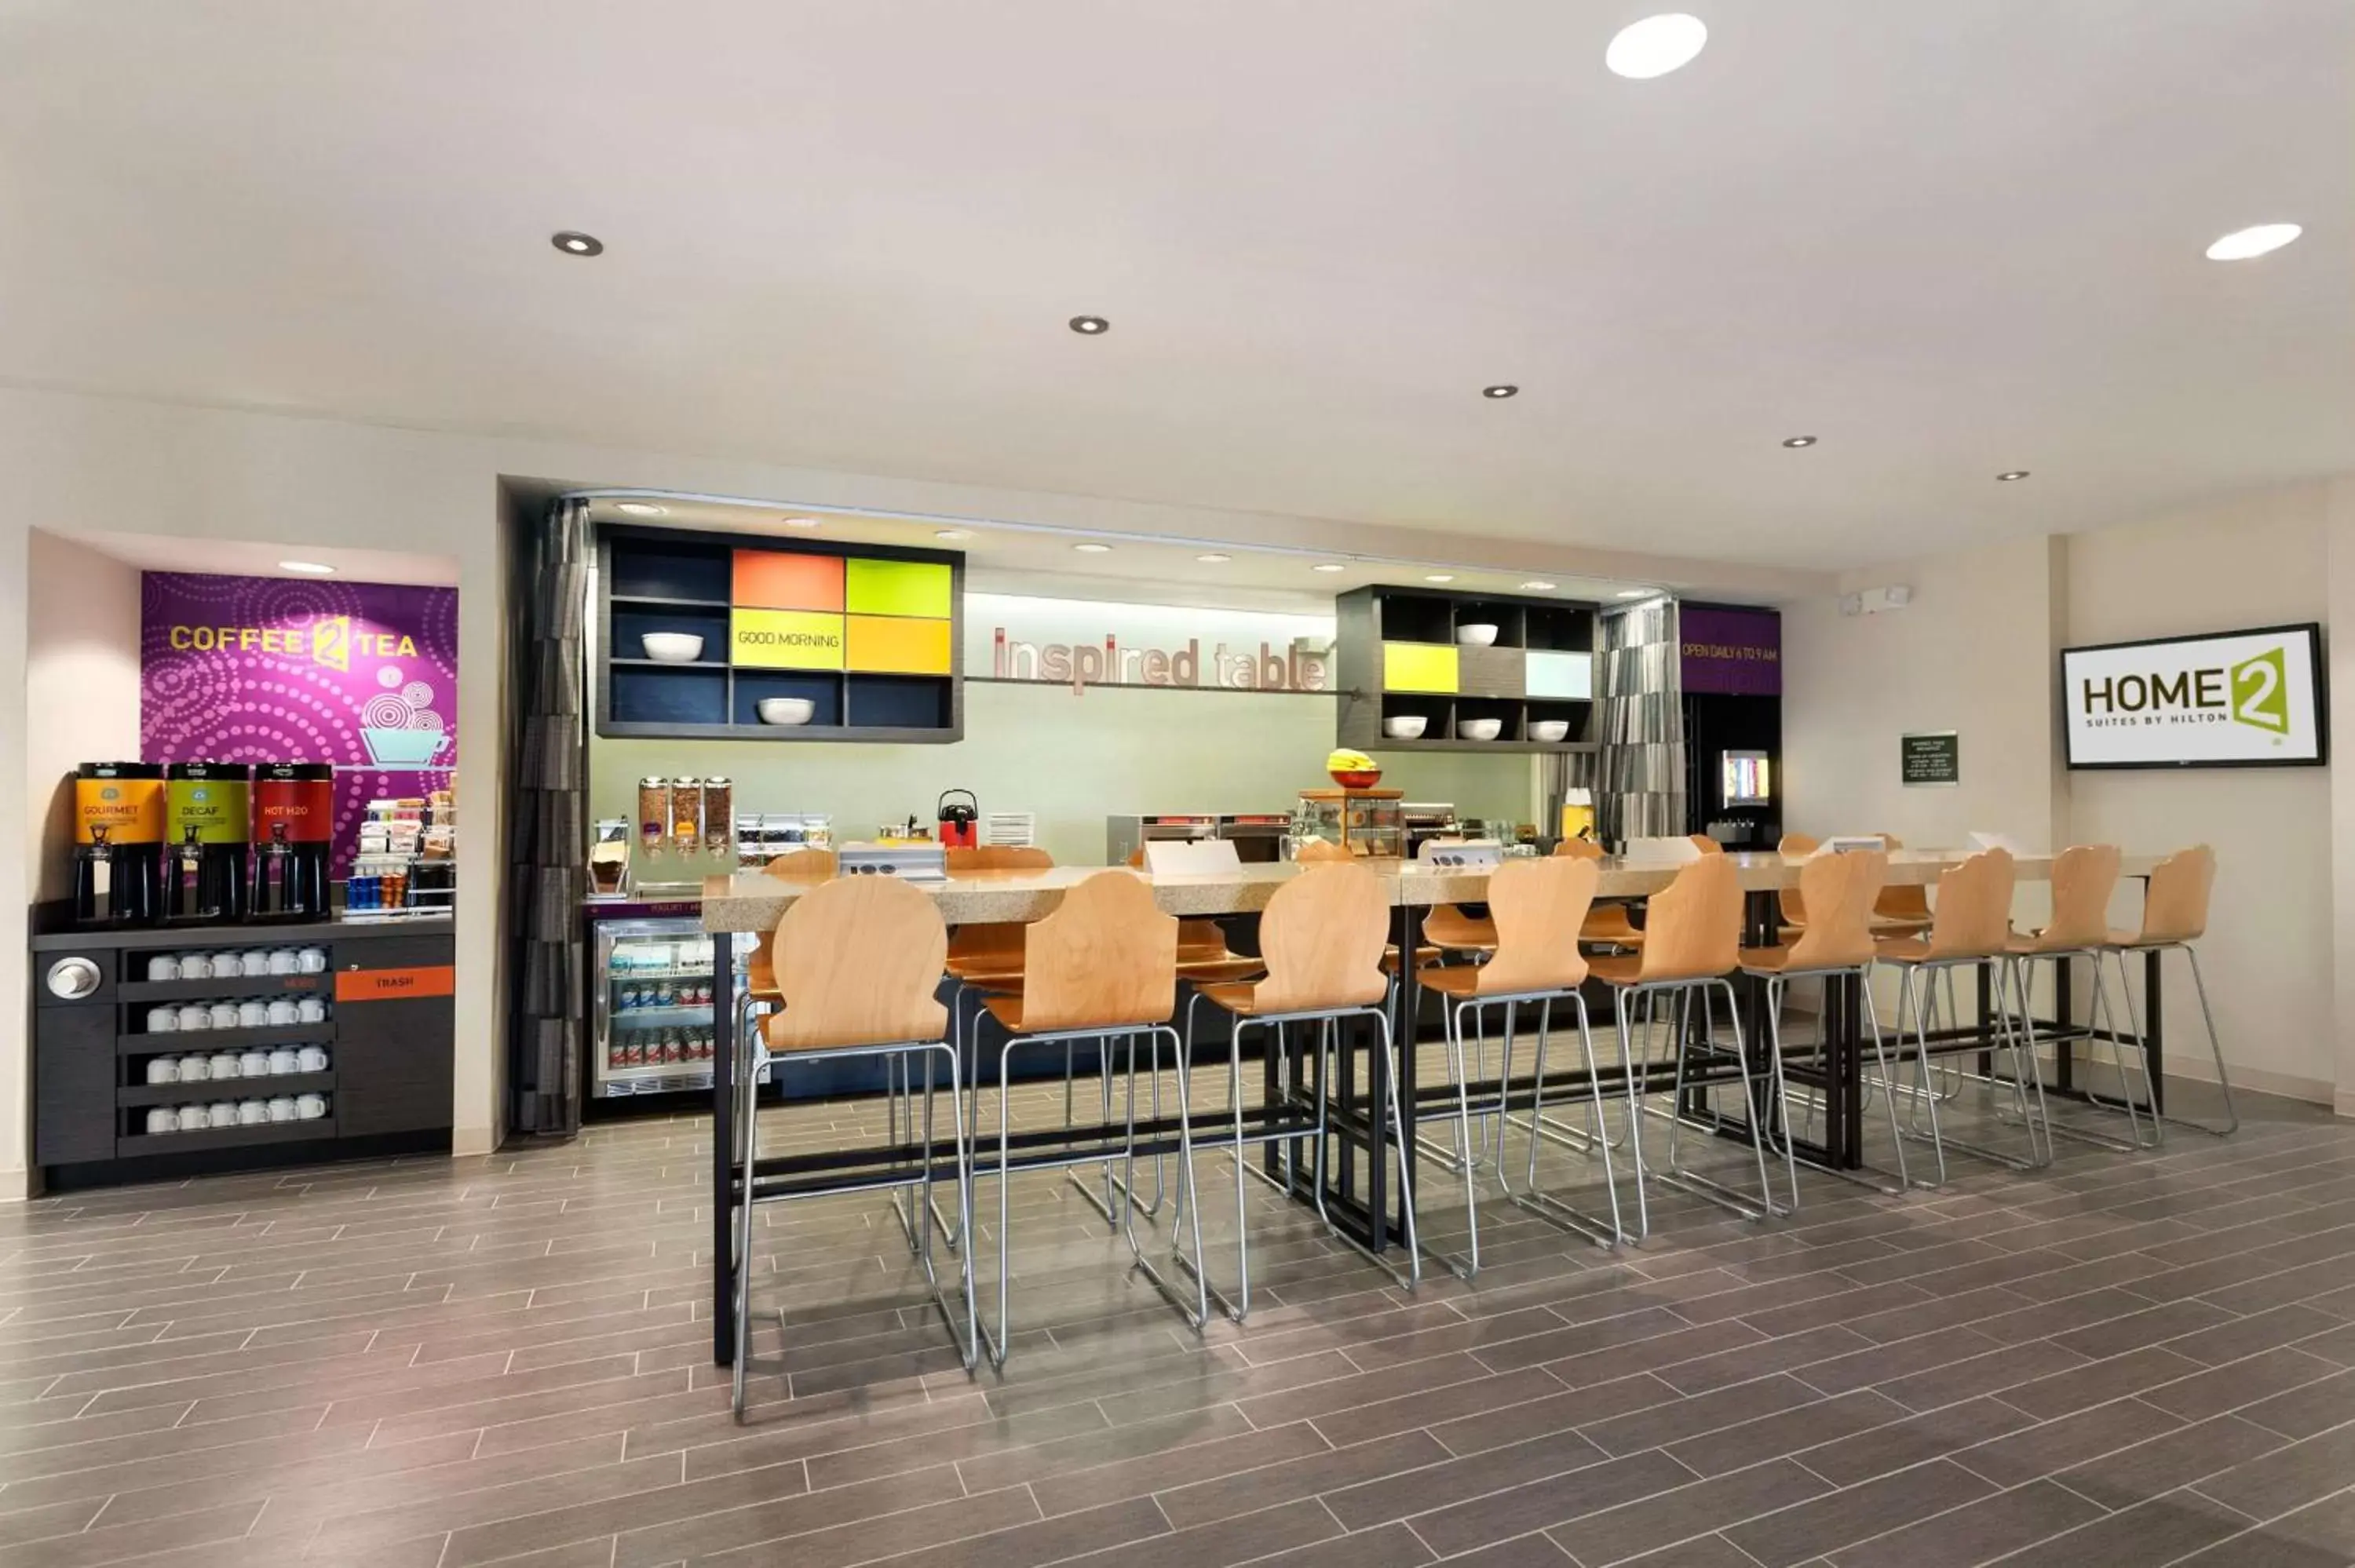 Breakfast in Home2 Suites by Hilton Pittsburgh - McCandless, PA